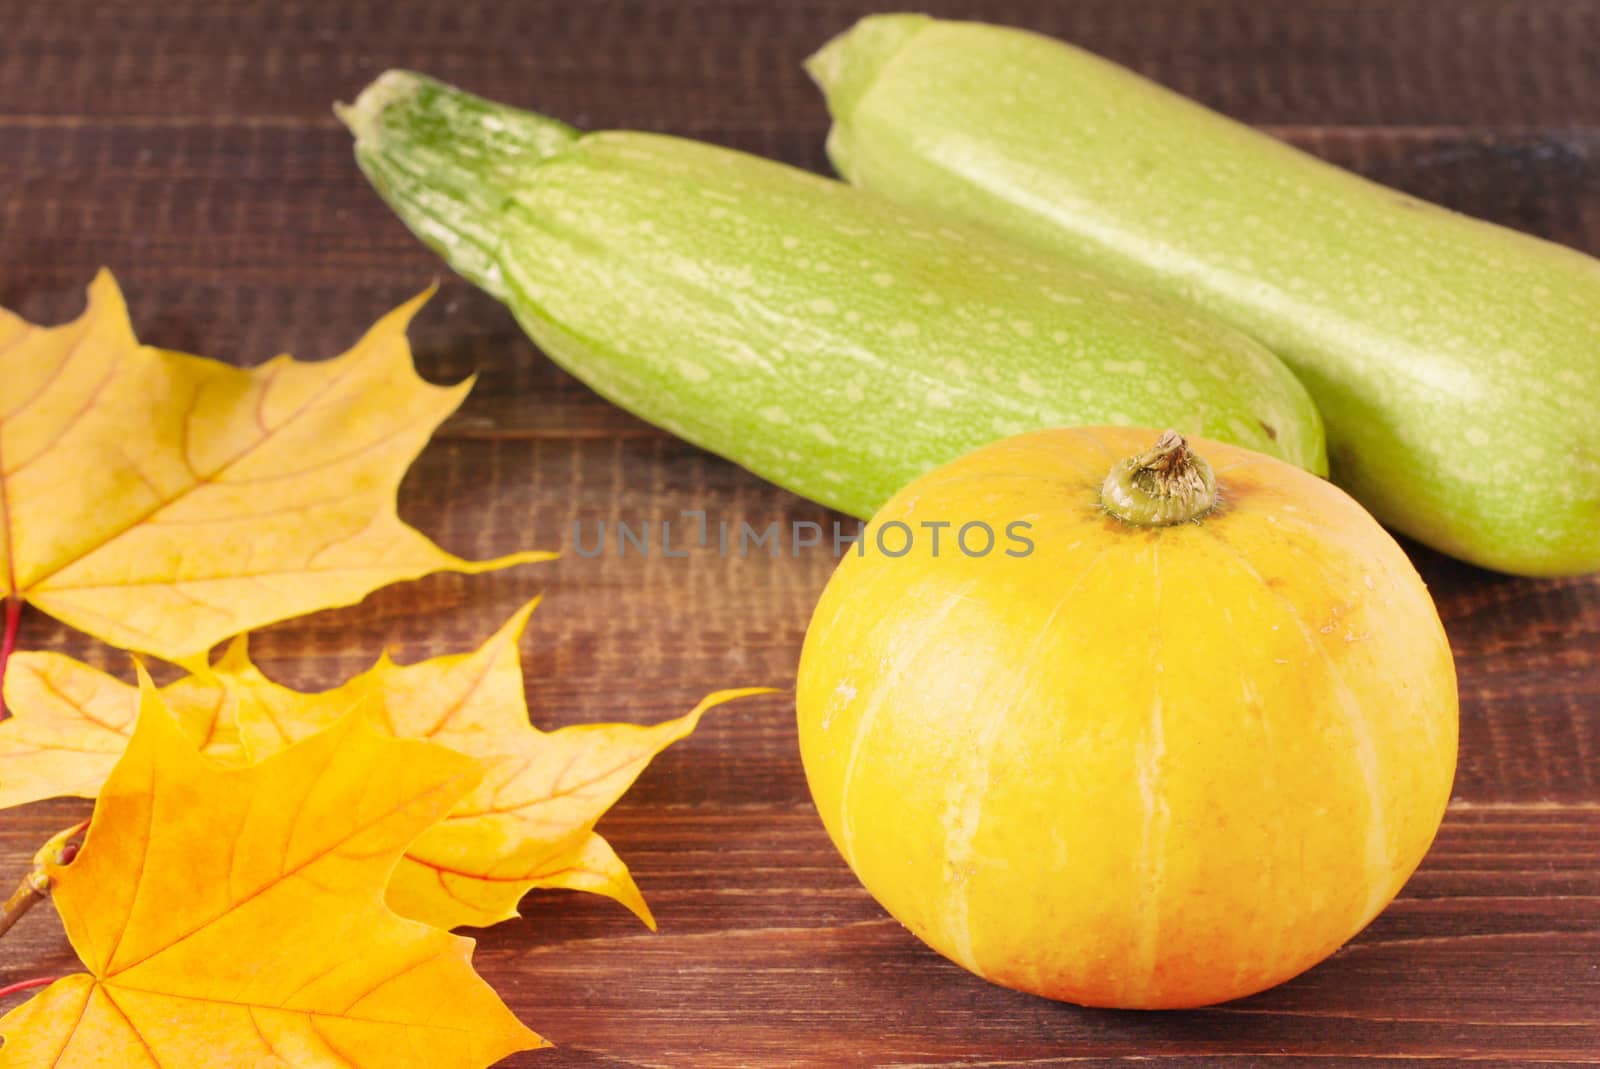 Pumpkin and zucchini on wooden table with autumn leaves. Food and drink, holidays, halloween concept